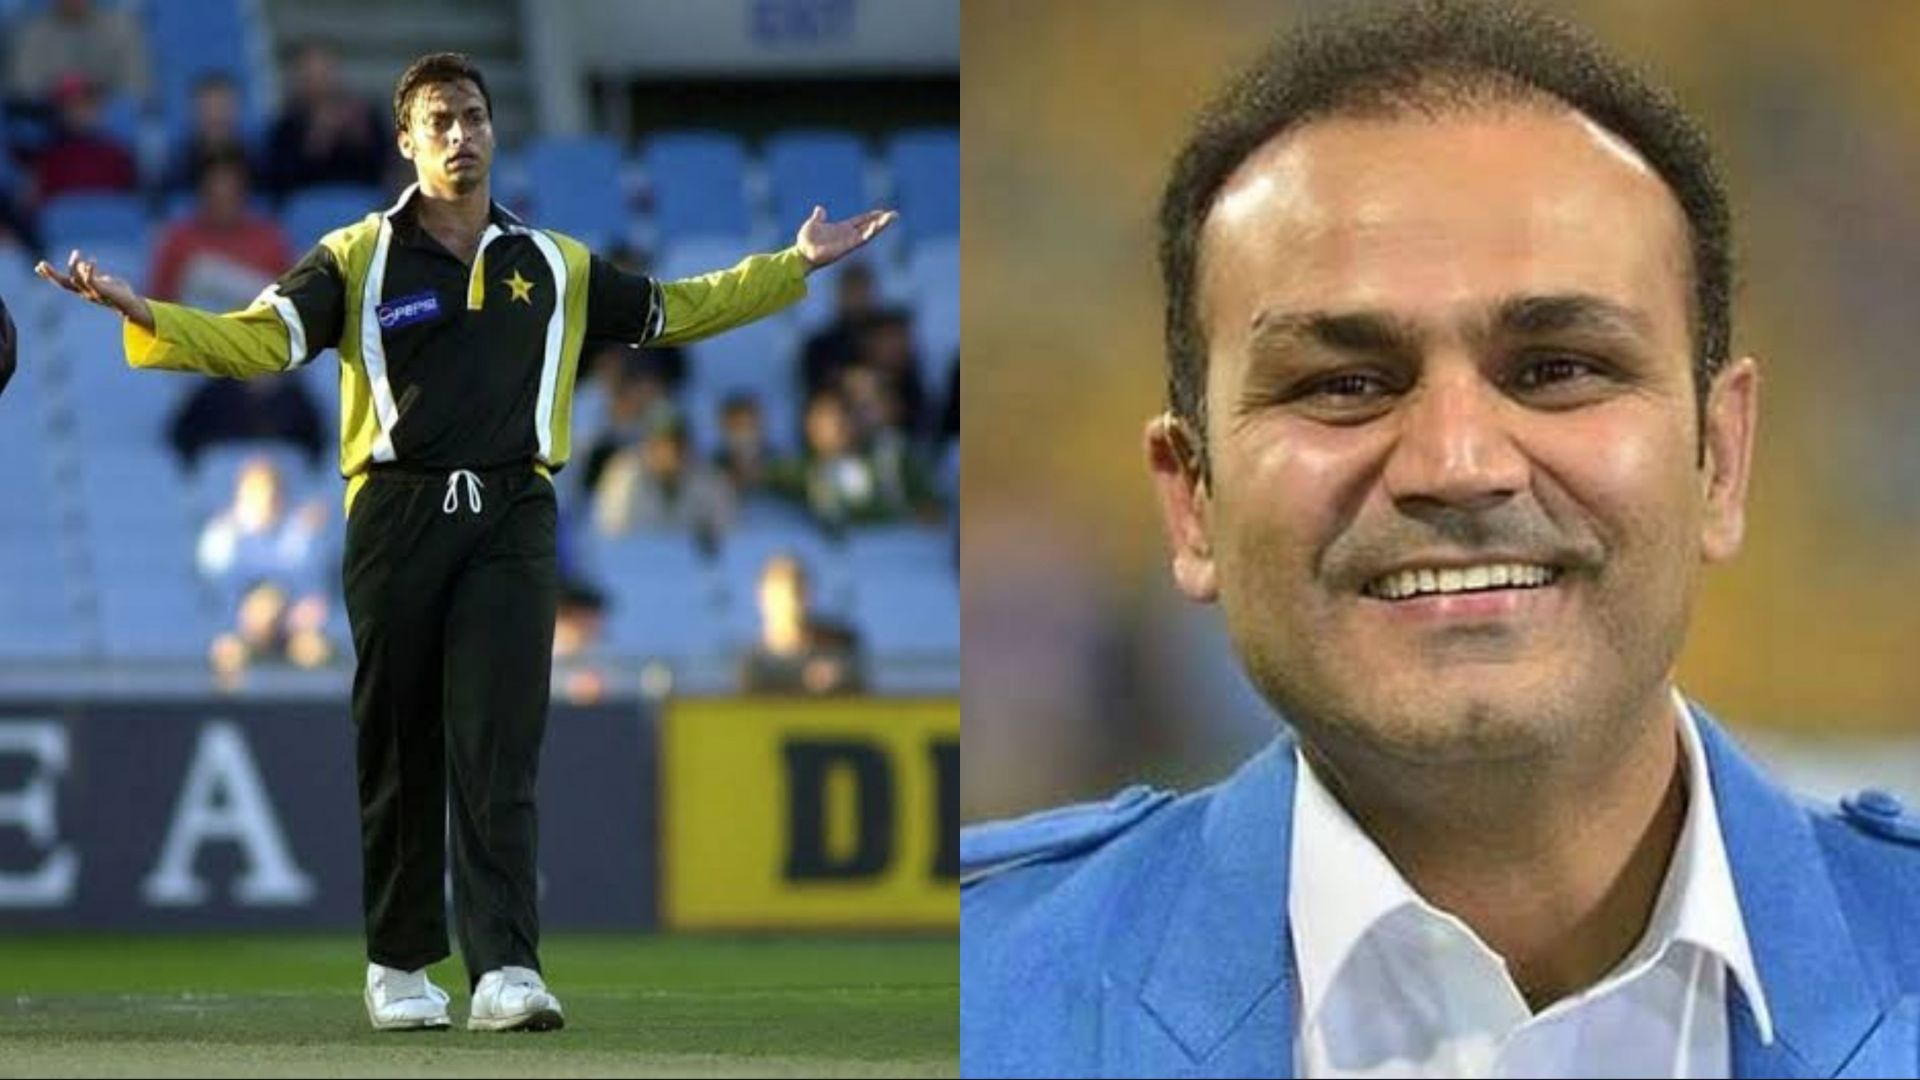 Virender Sehwag gave an epic reply to Shoaib Akhtar during an India vs Pakistan match 